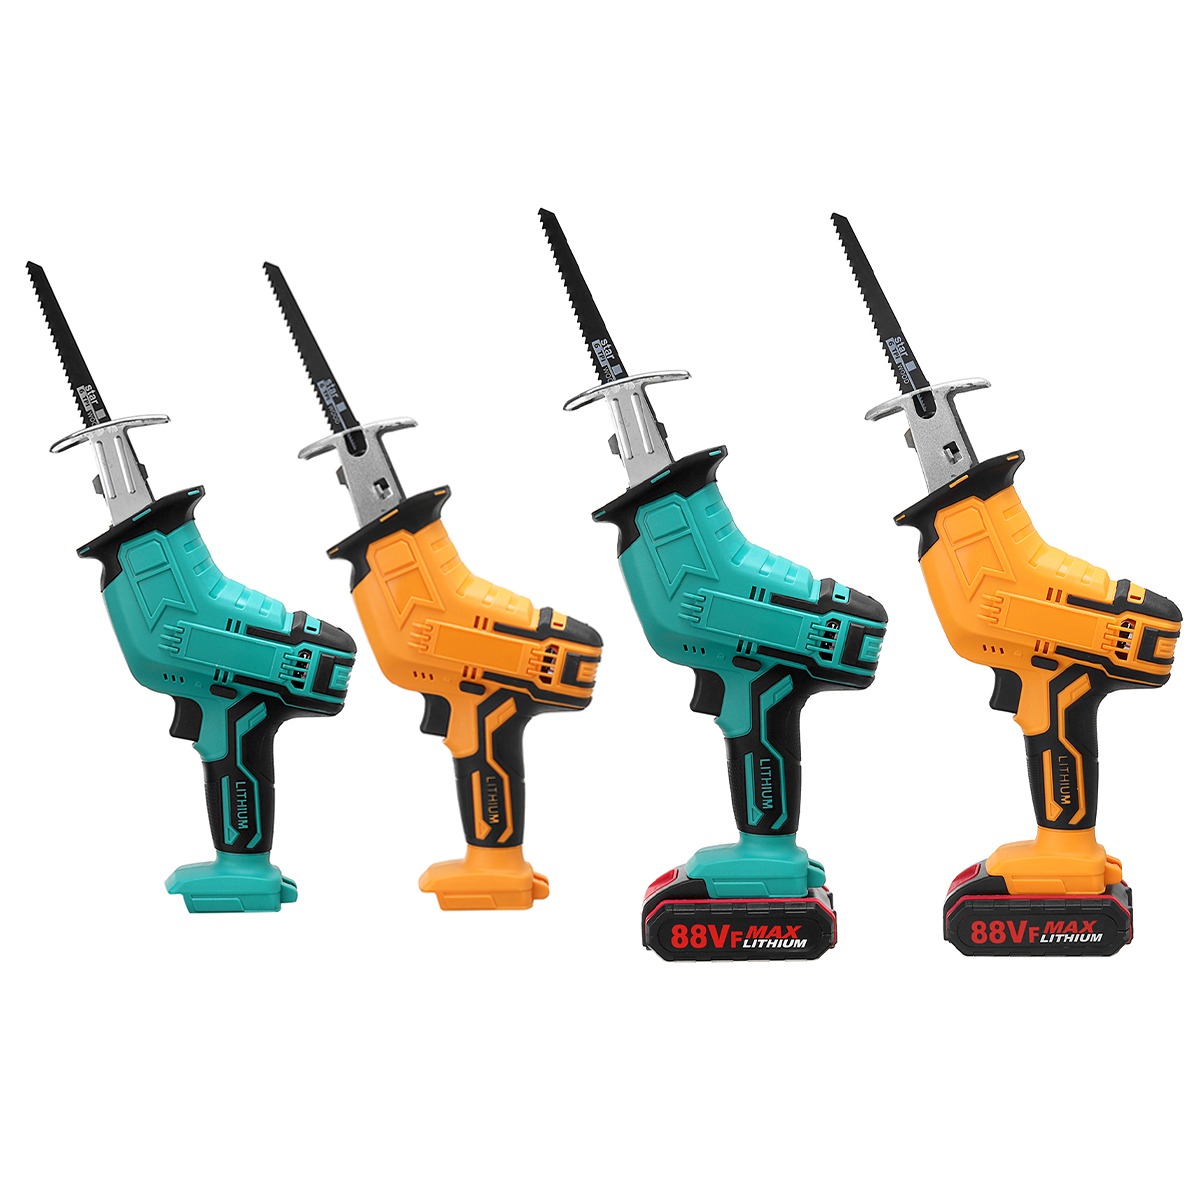 Rechargeable-Cordless-Reciprocating-Saw-Handheld-Woodorking-Wood-Cutter-W-None12-Battery--4PCS-Saw-B-1879912-12